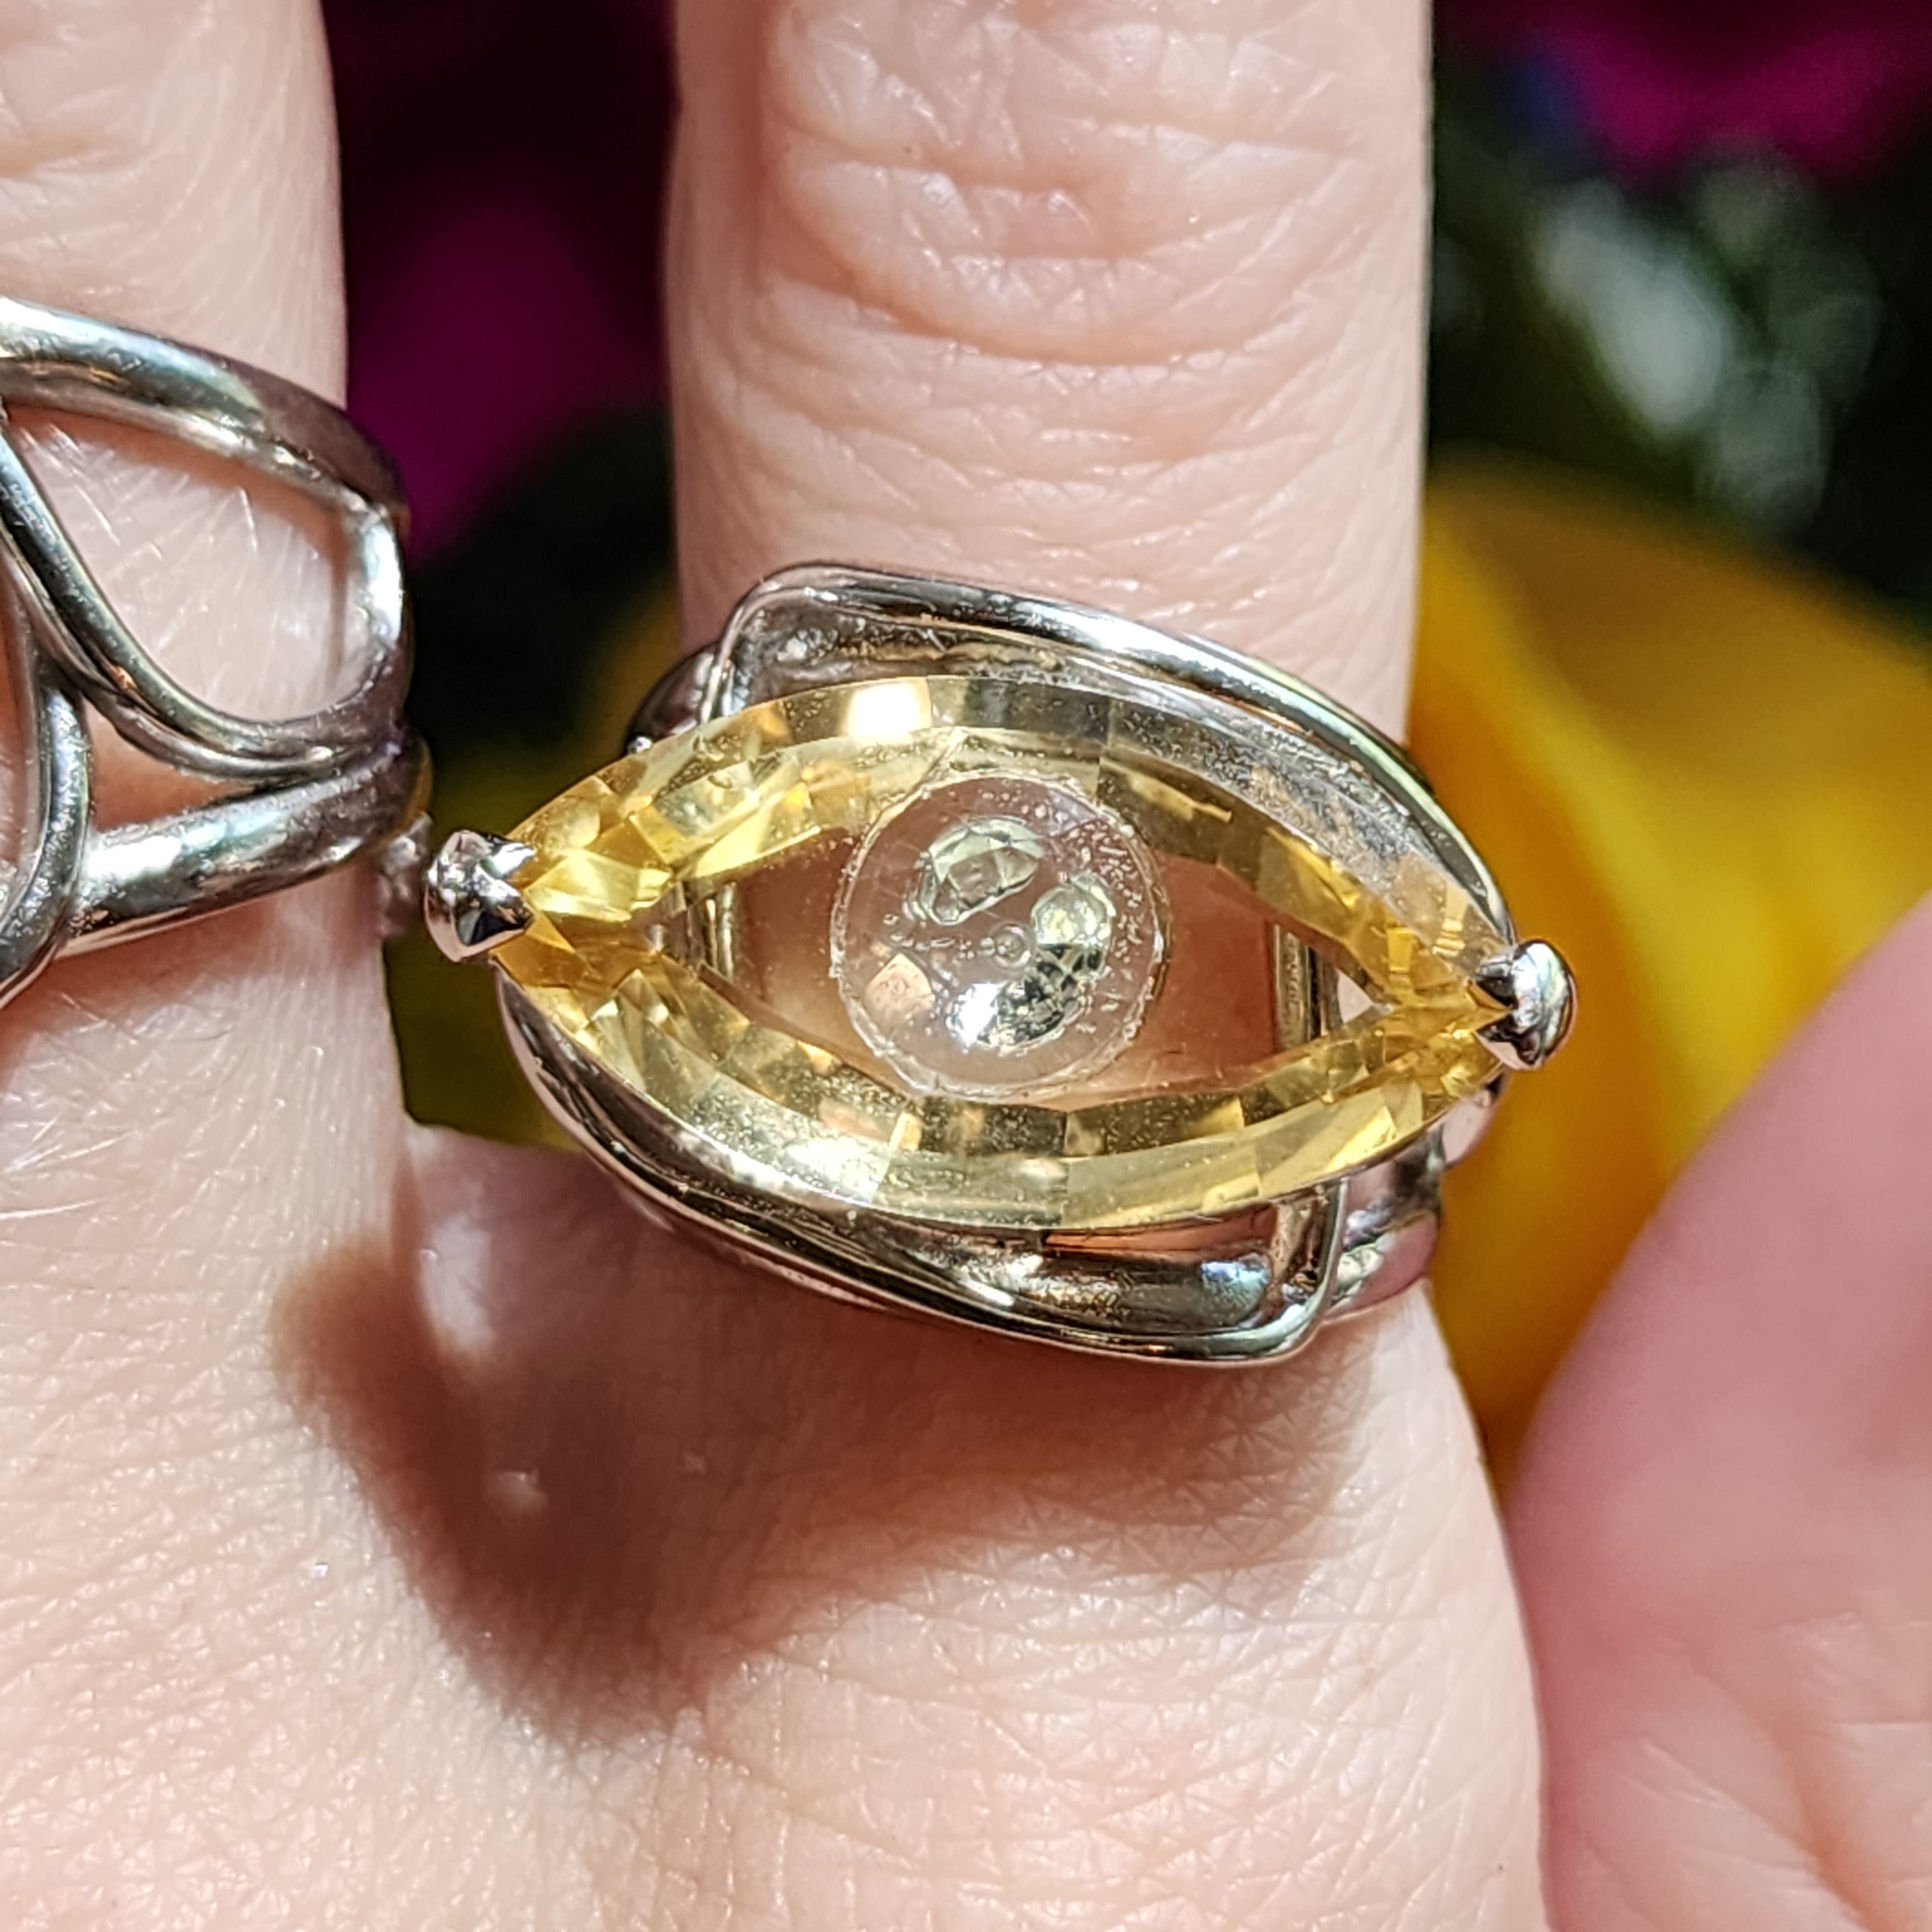 Citrine Evil Eye with Blue Topaz Inlay Adjustable Finger Cuff Ring .925 Silver for Abundance, Intuition, Luck and Protection